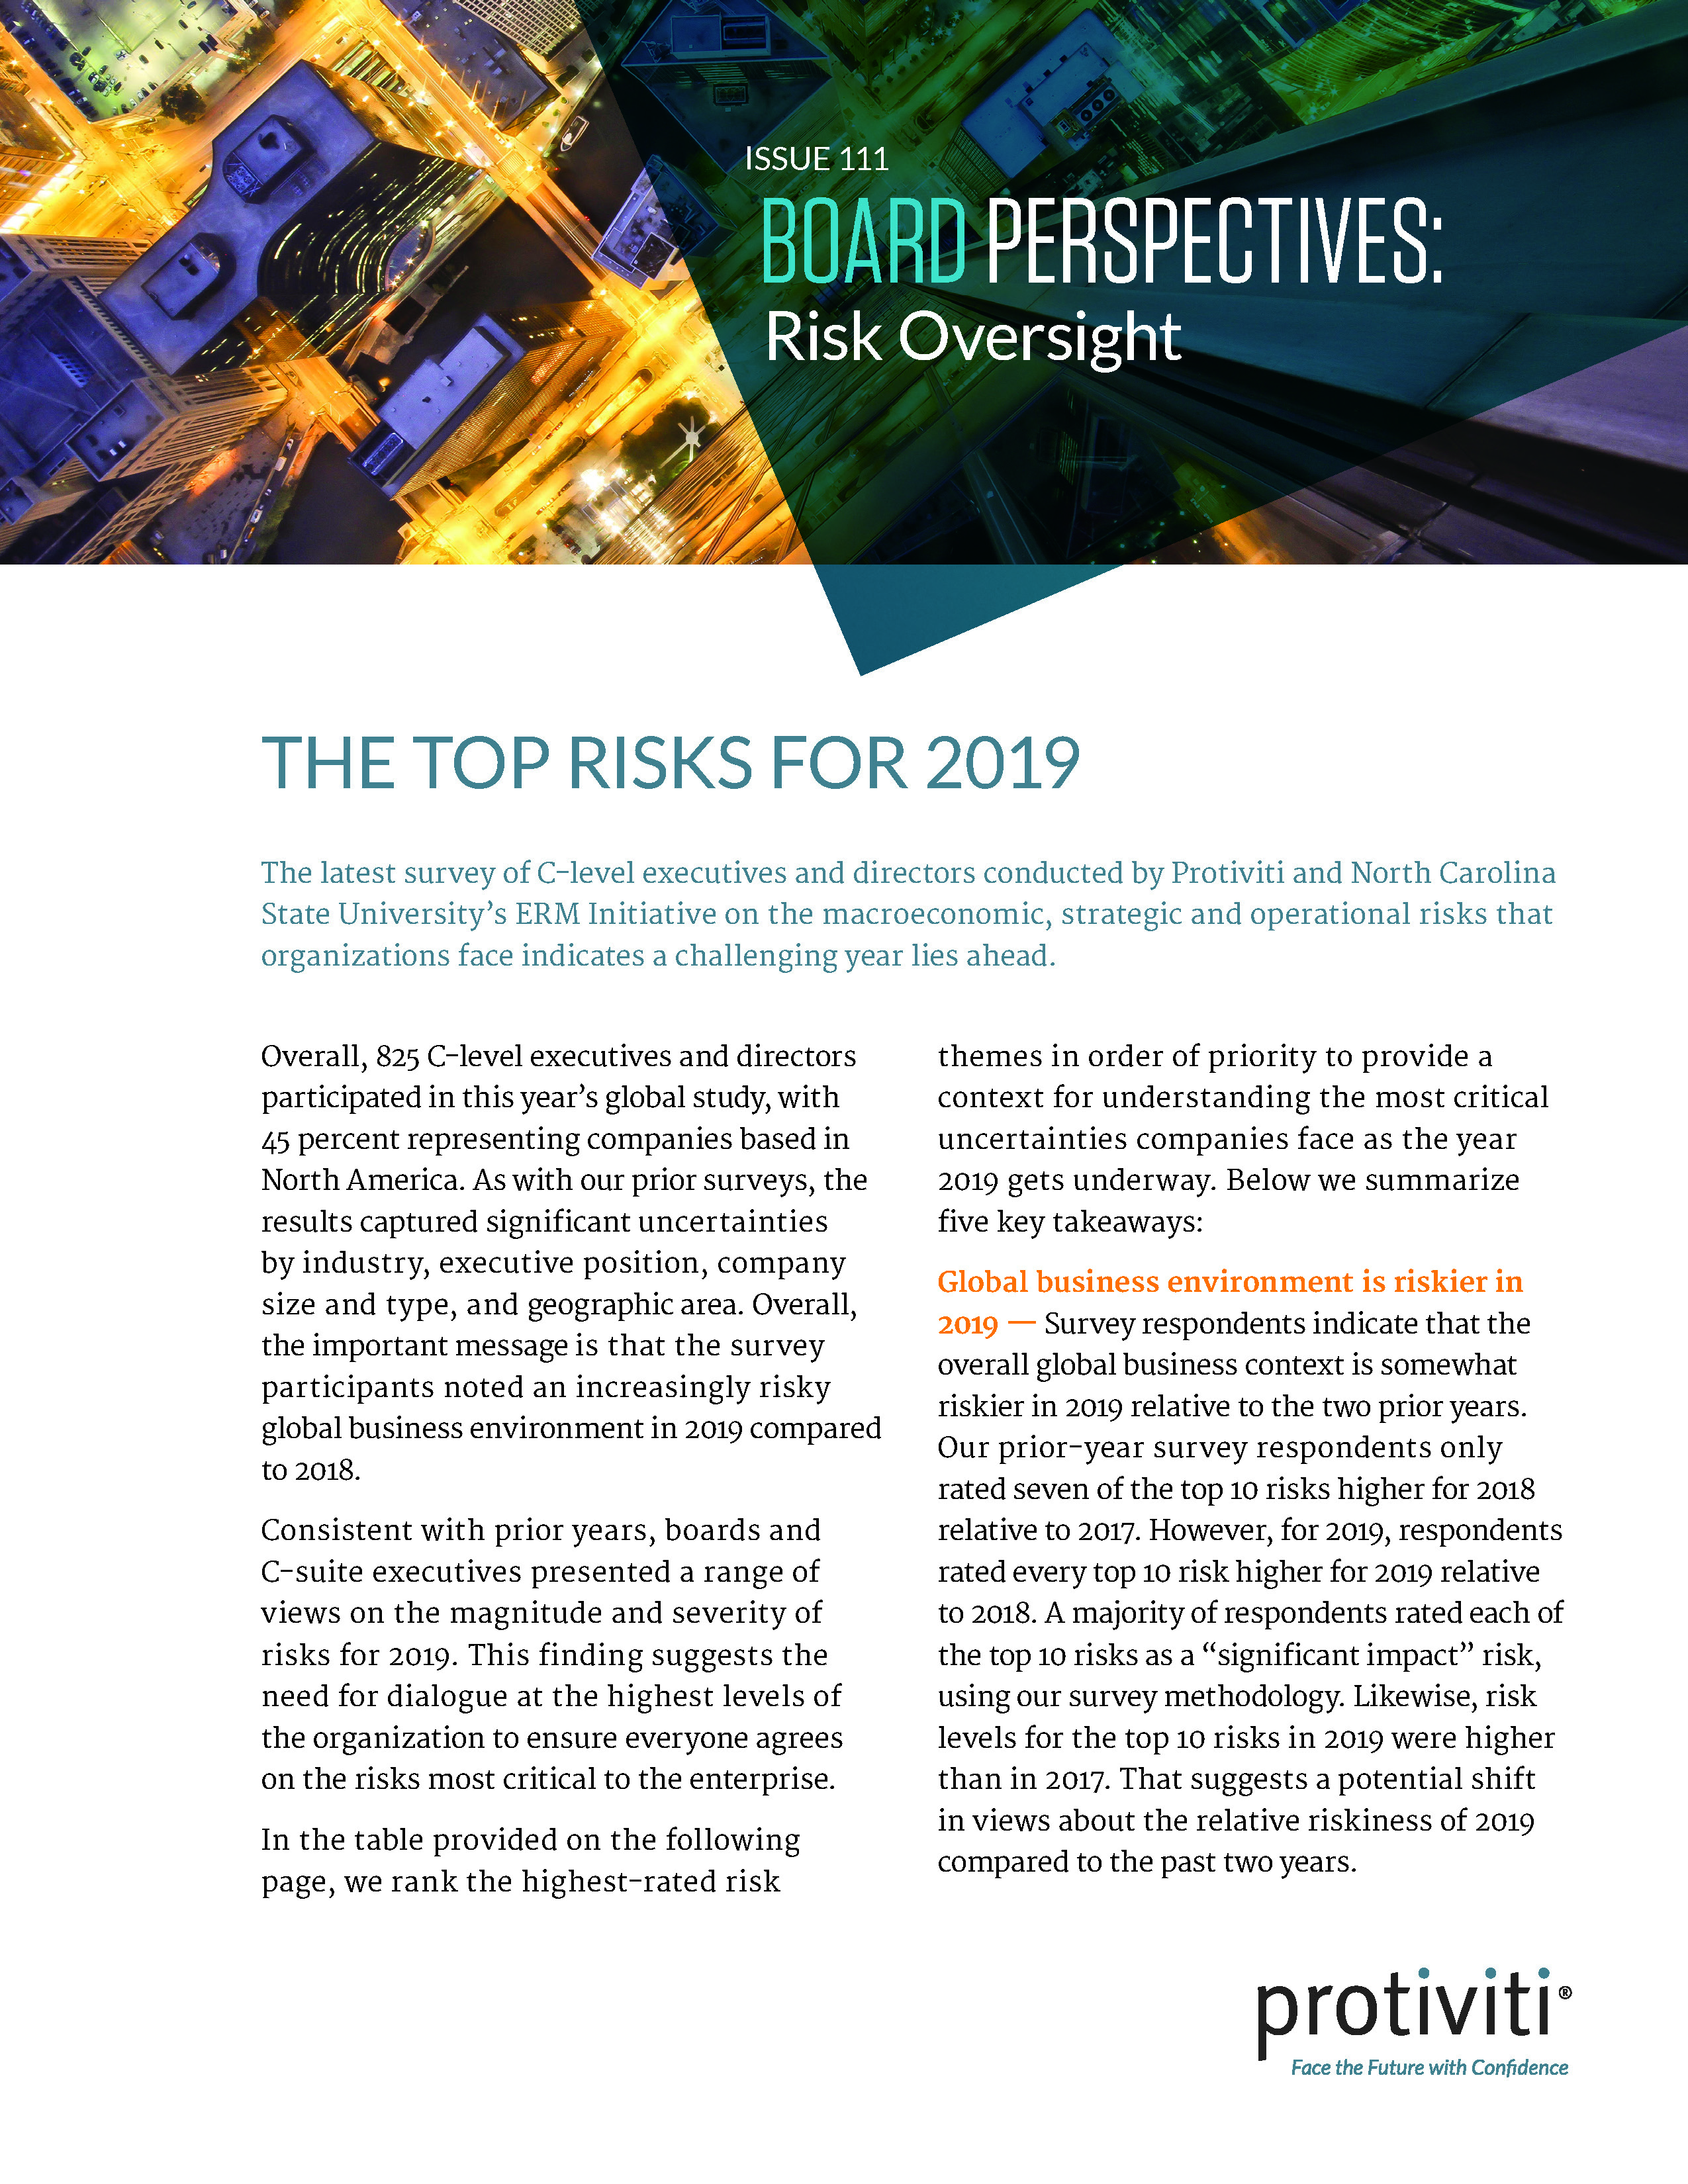 Screenshot of the first page of The Top Risks for 2019